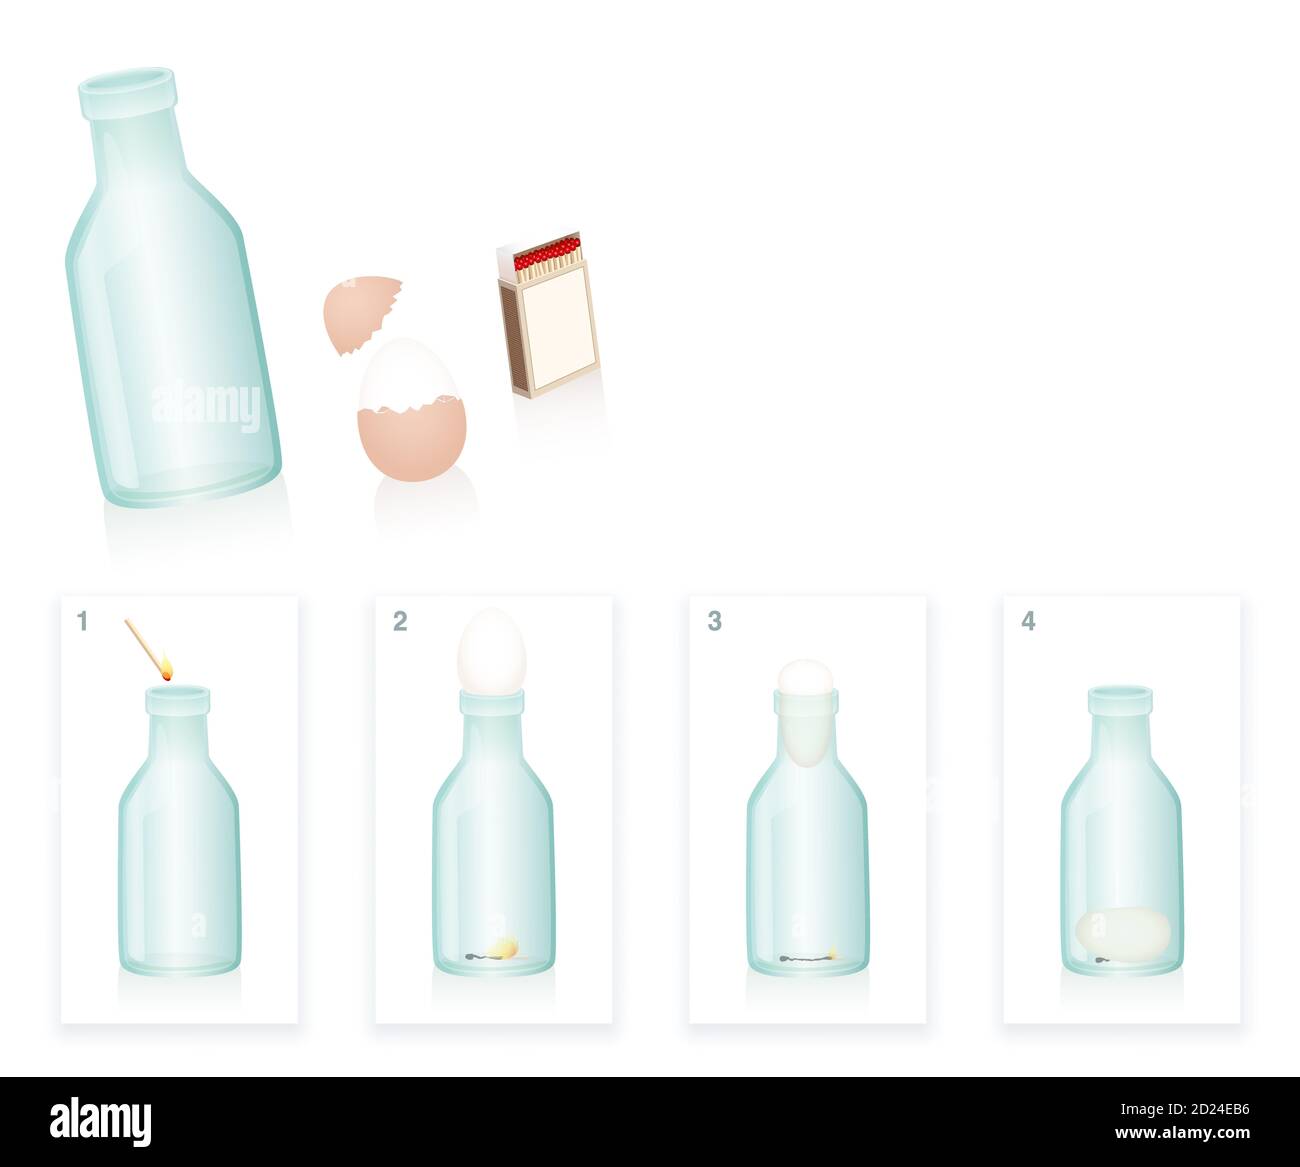 Physical school experiment with boiled egg sucked into a bottle because of vacuum caused by falling temperature. Procedure and solution in four steps. Stock Photo